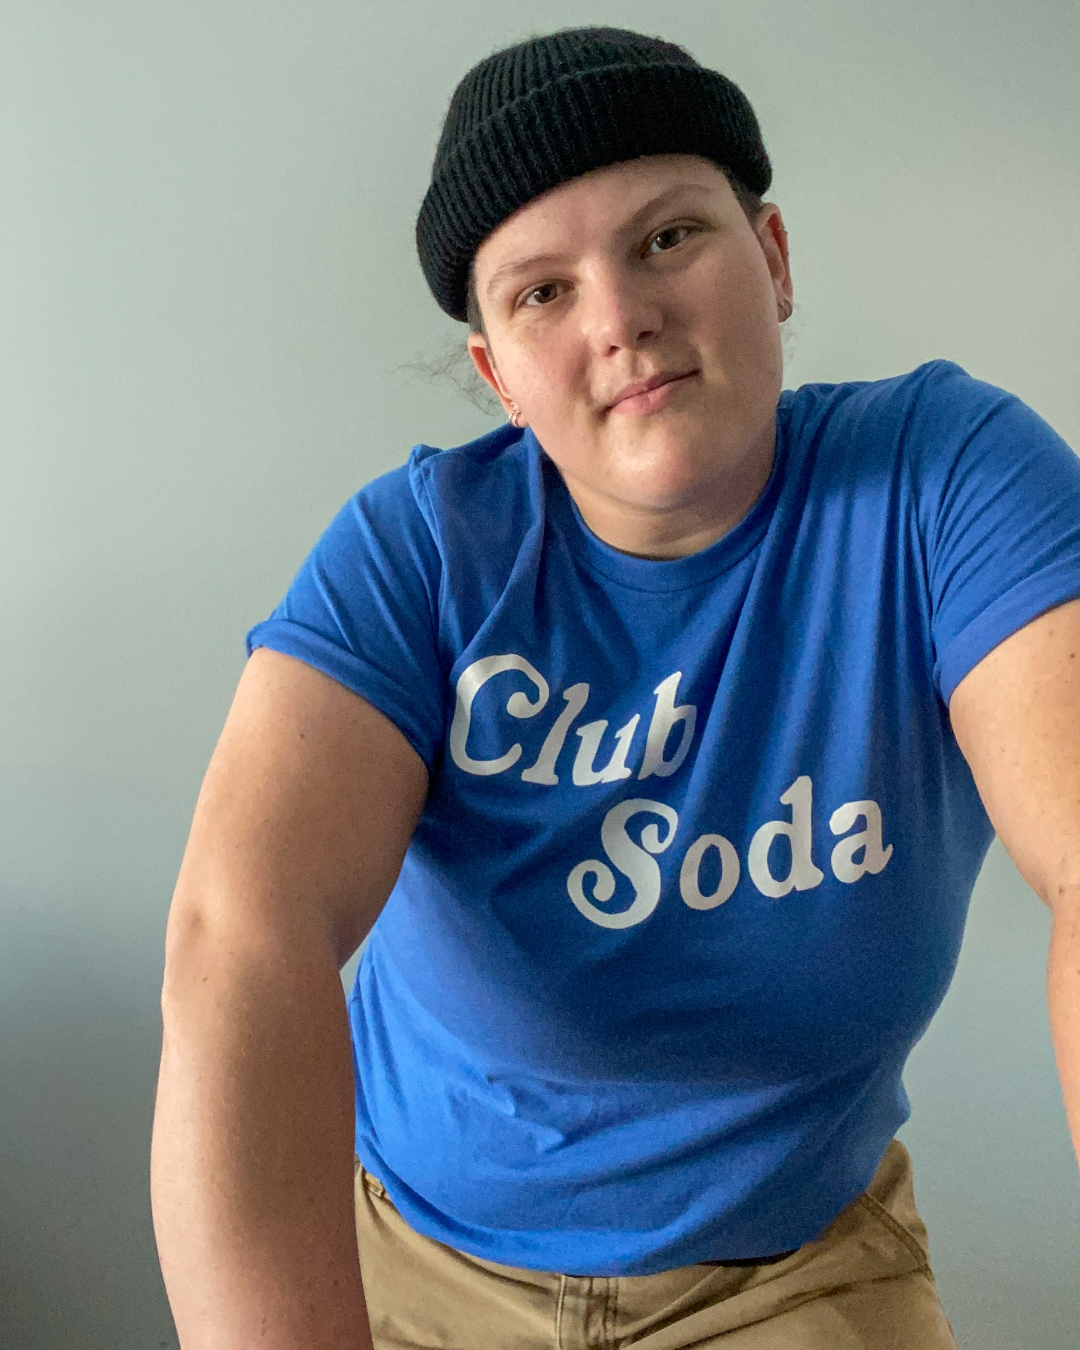 Model Jenny is 5'9" and a 38DDD, wearing size XL. The Club Soda Tee is a blue shirt in jersey blend. It has the words "Club Soda" printed in retro cursive typeface in off-white color. Club Soda represents those who are in the sober club.